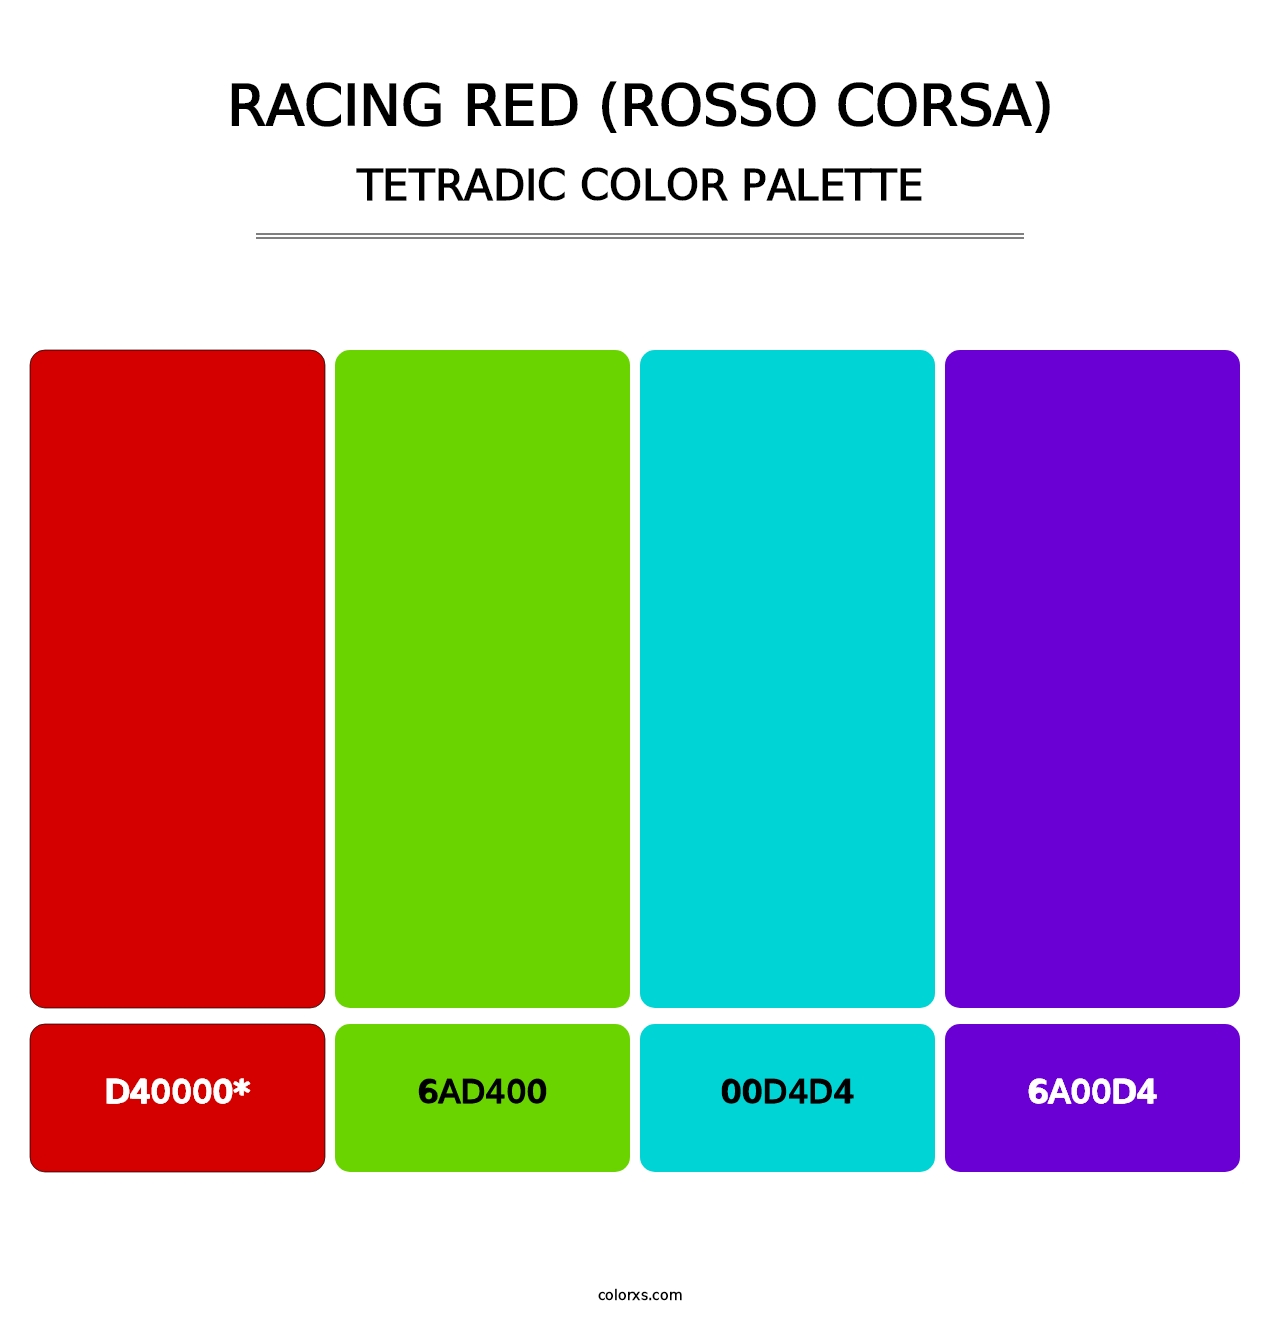 Racing Red (Rosso Corsa) - Tetradic Color Palette